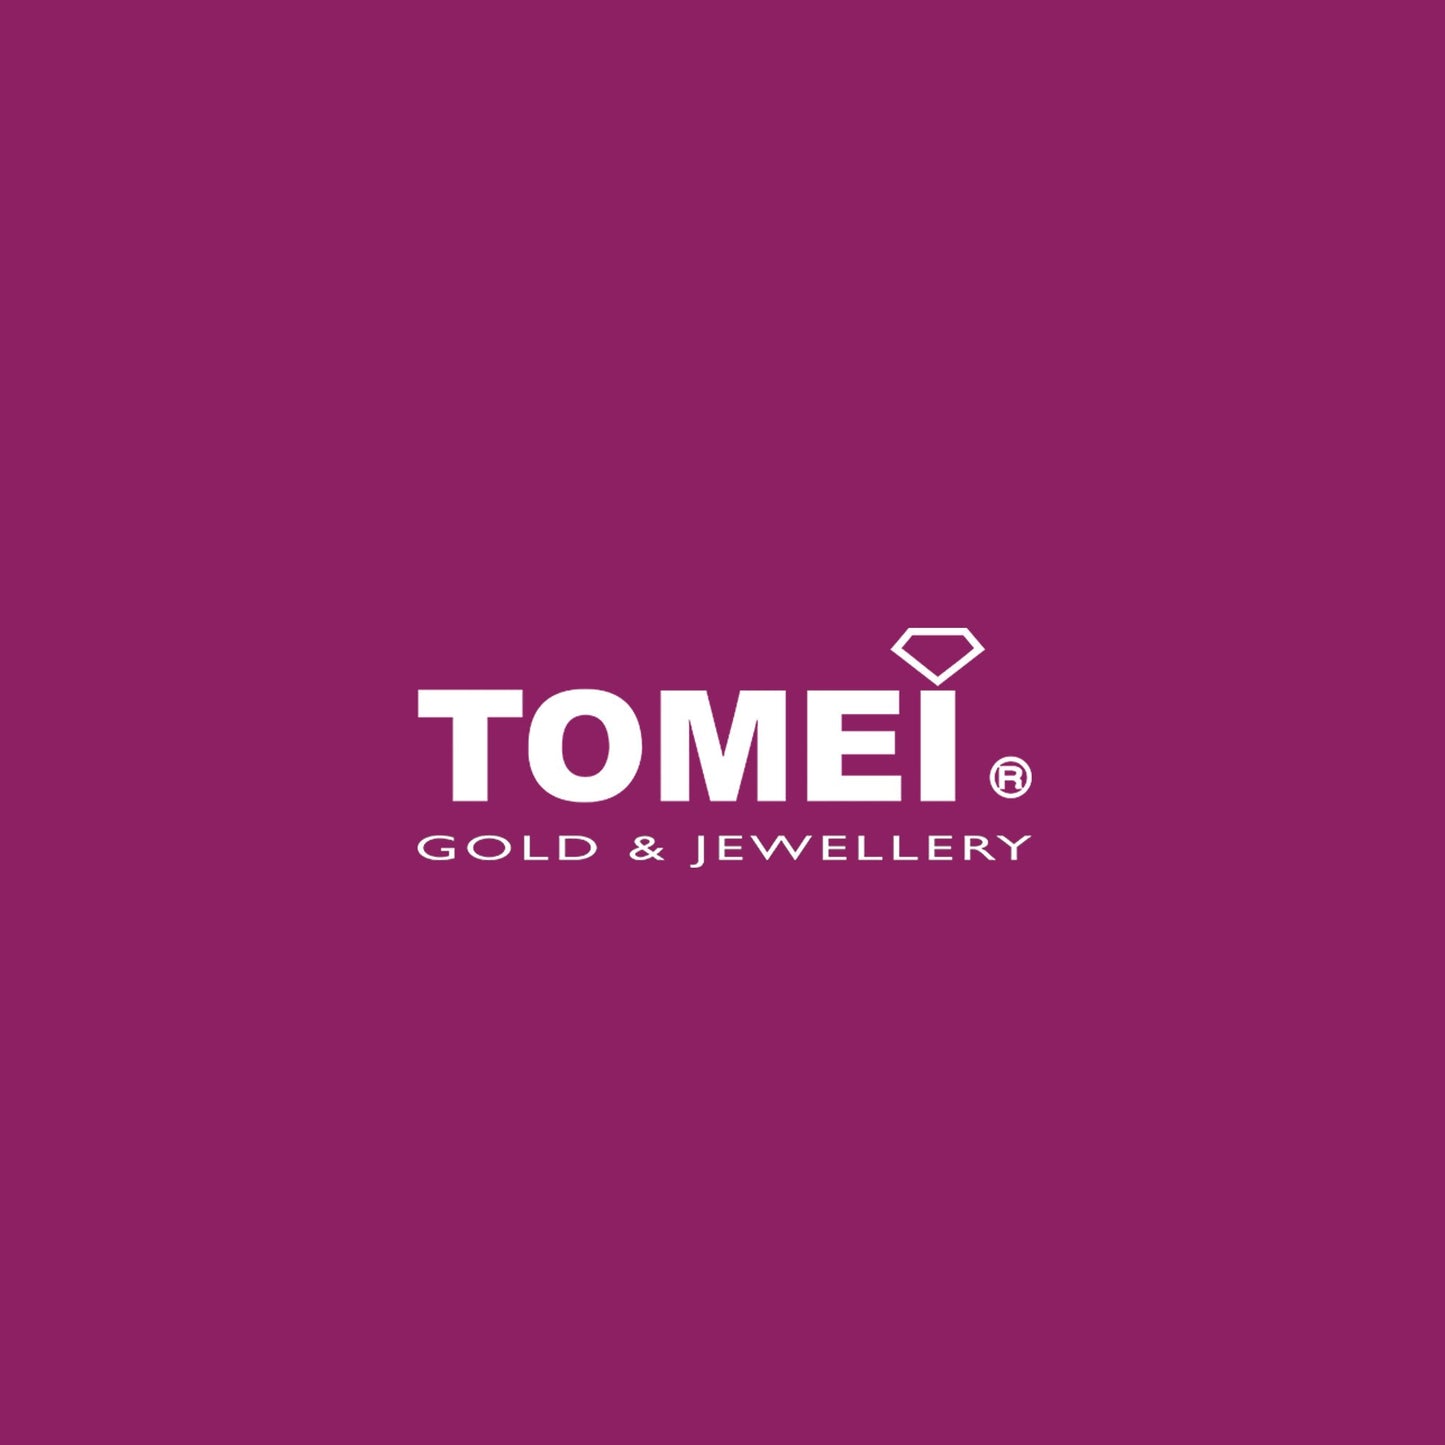 TOMEI Classic Round Stud Earrings, White Gold 585 (E1220)